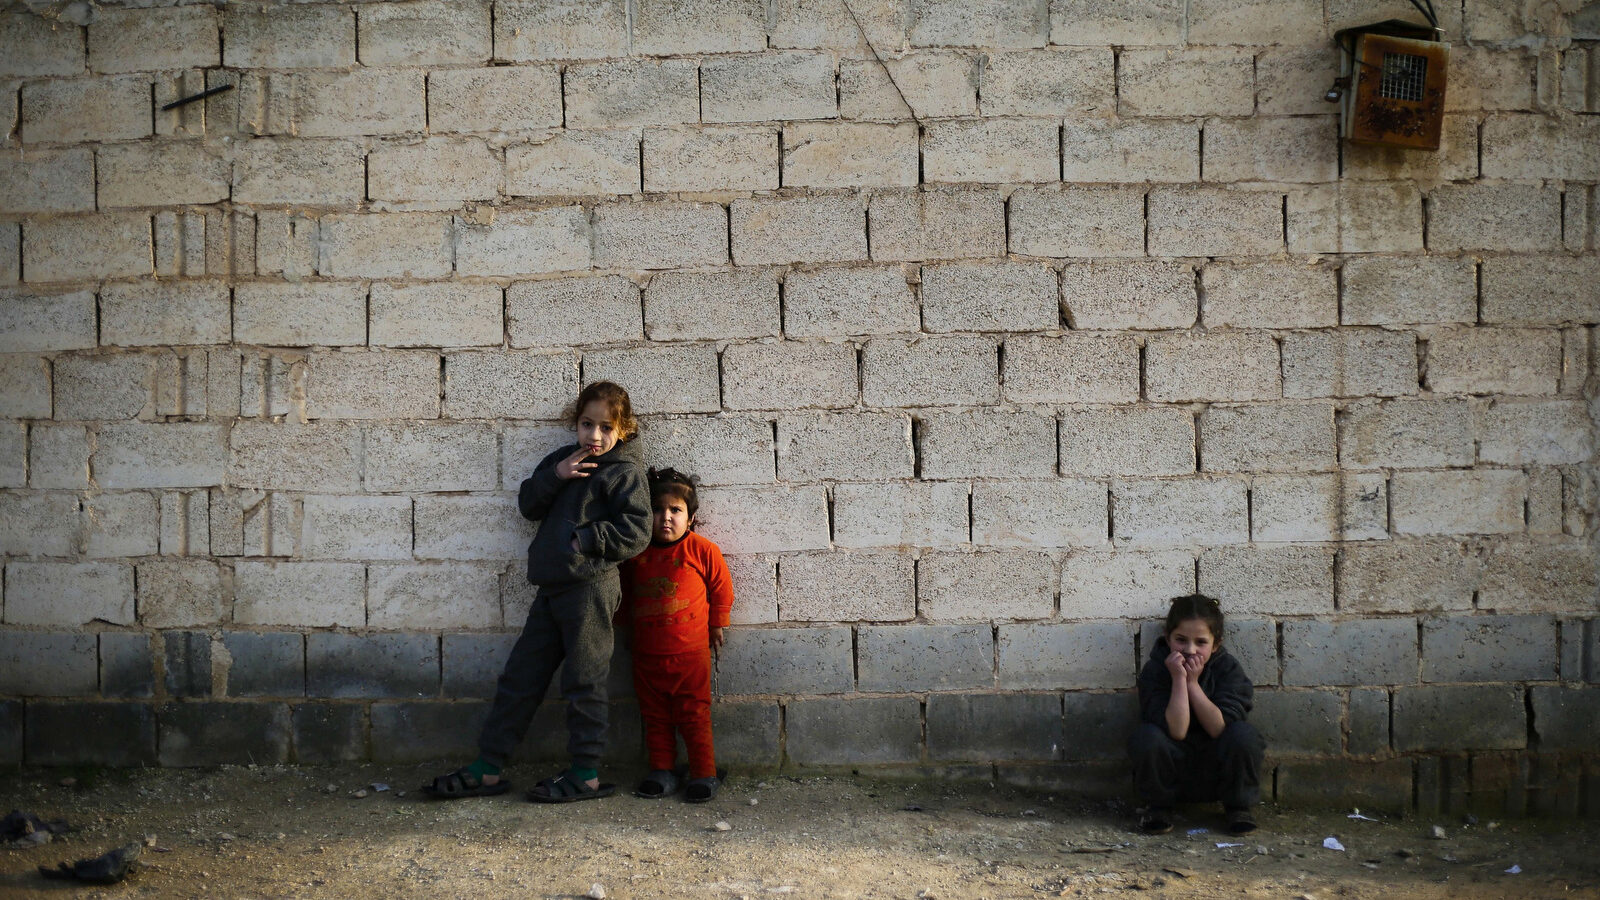 In this Wednesday, Jan. 18, 2017 photo, Syrian girls who fled from the village of Deir Hafer with their family watch their brothers playing in the town of Safira, just south of Aleppo, Syria, Wednesday, Jan. 18, 2017. As Islamic State-held areas in northern Syria come increasingly under attack by an assortment of groups, thousands of civilians have been risking their lives to make the perilous journey out, paying smugglers to escape the shelling and the extremist group's terror, many of them opting to go to government-controlled territory. (AP Photo/Hassan Ammar)